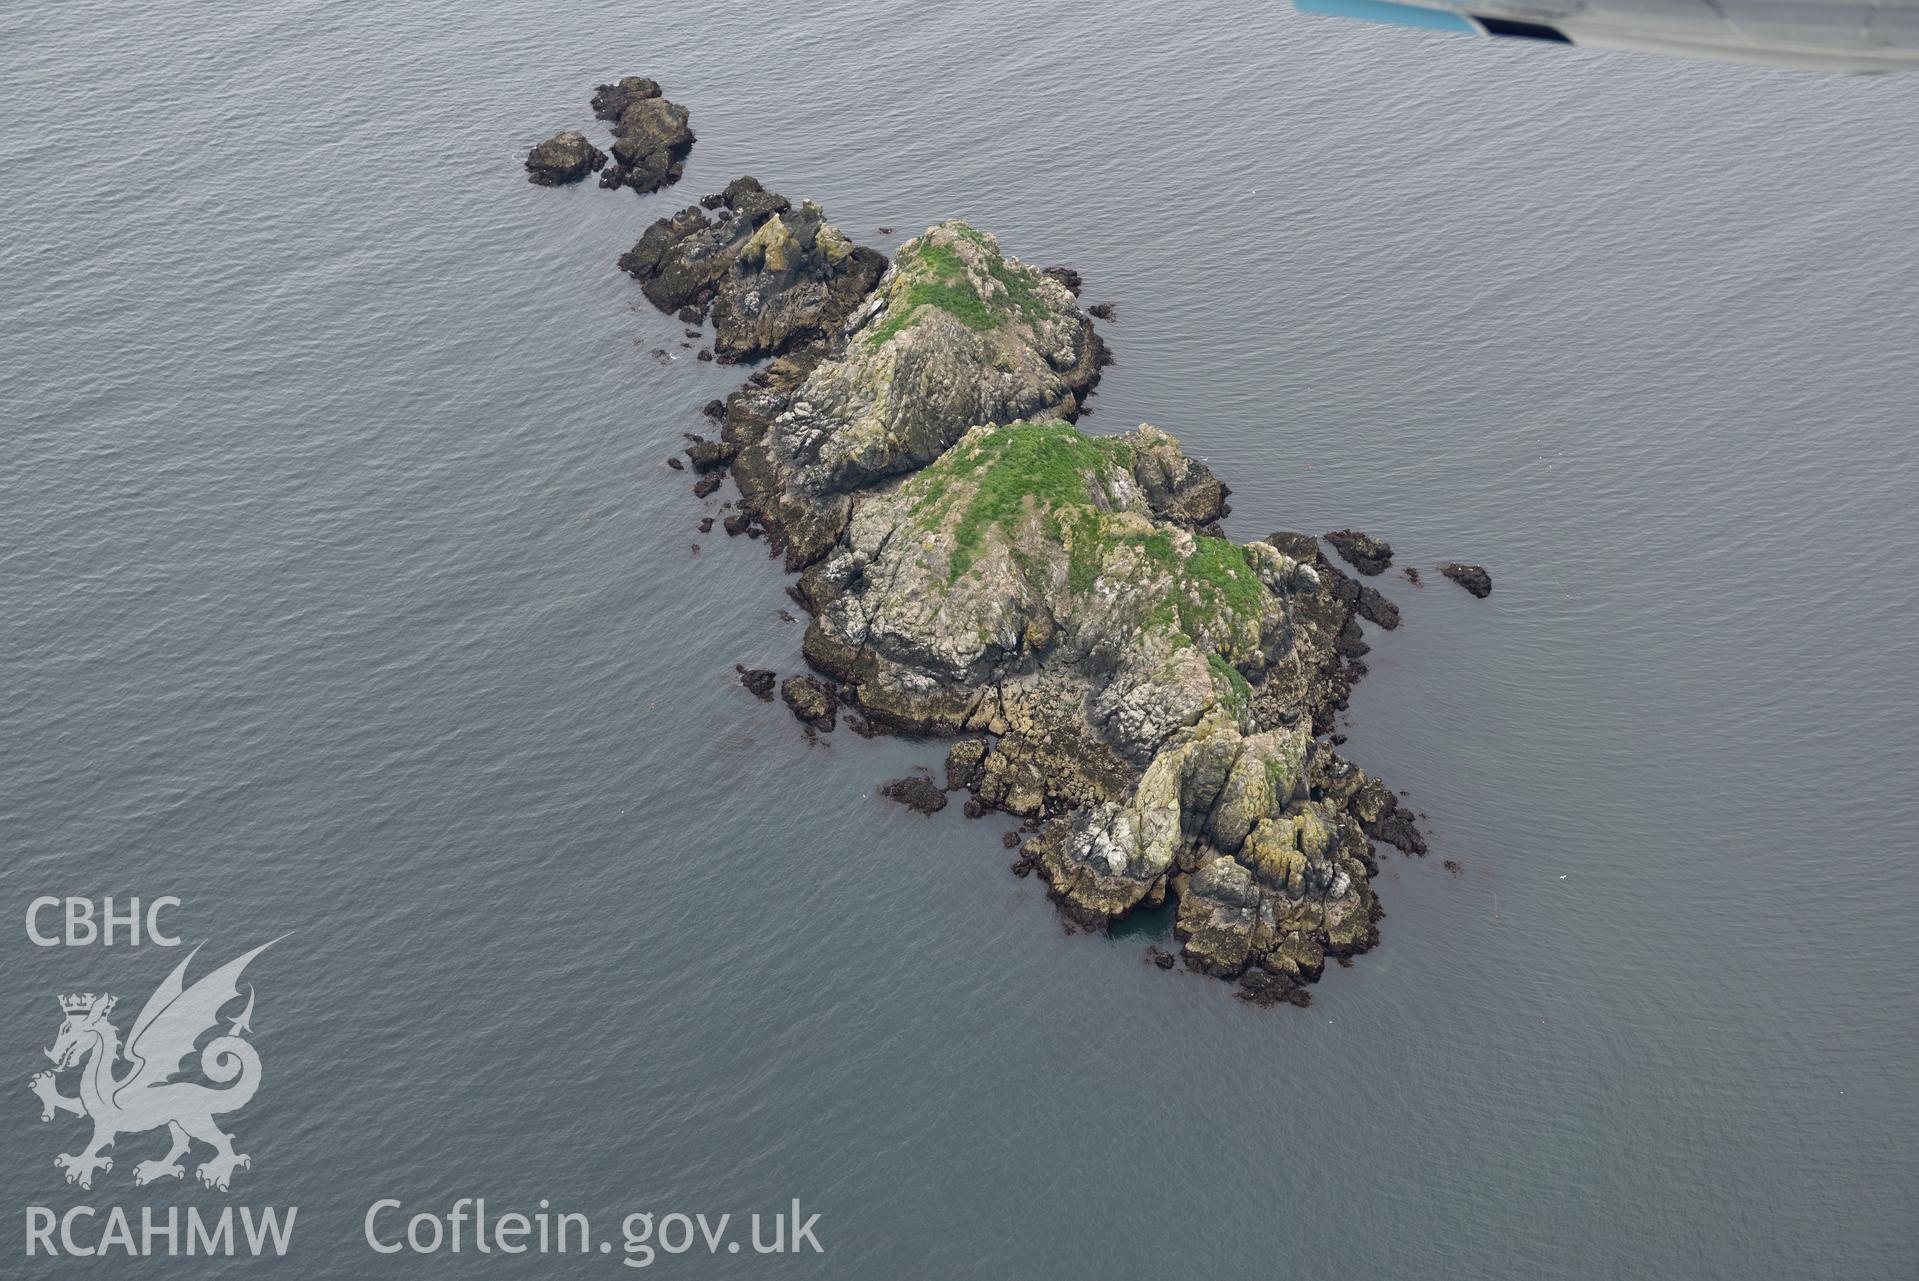 Stack Rocks, at extreme low tide. Baseline aerial reconnaissance survey for the CHERISH Project. ? Crown: CHERISH PROJECT 2017. Produced with EU funds through the Ireland Wales Co-operation Programme 2014-2020. All material made freely available through the Open Government Licence.